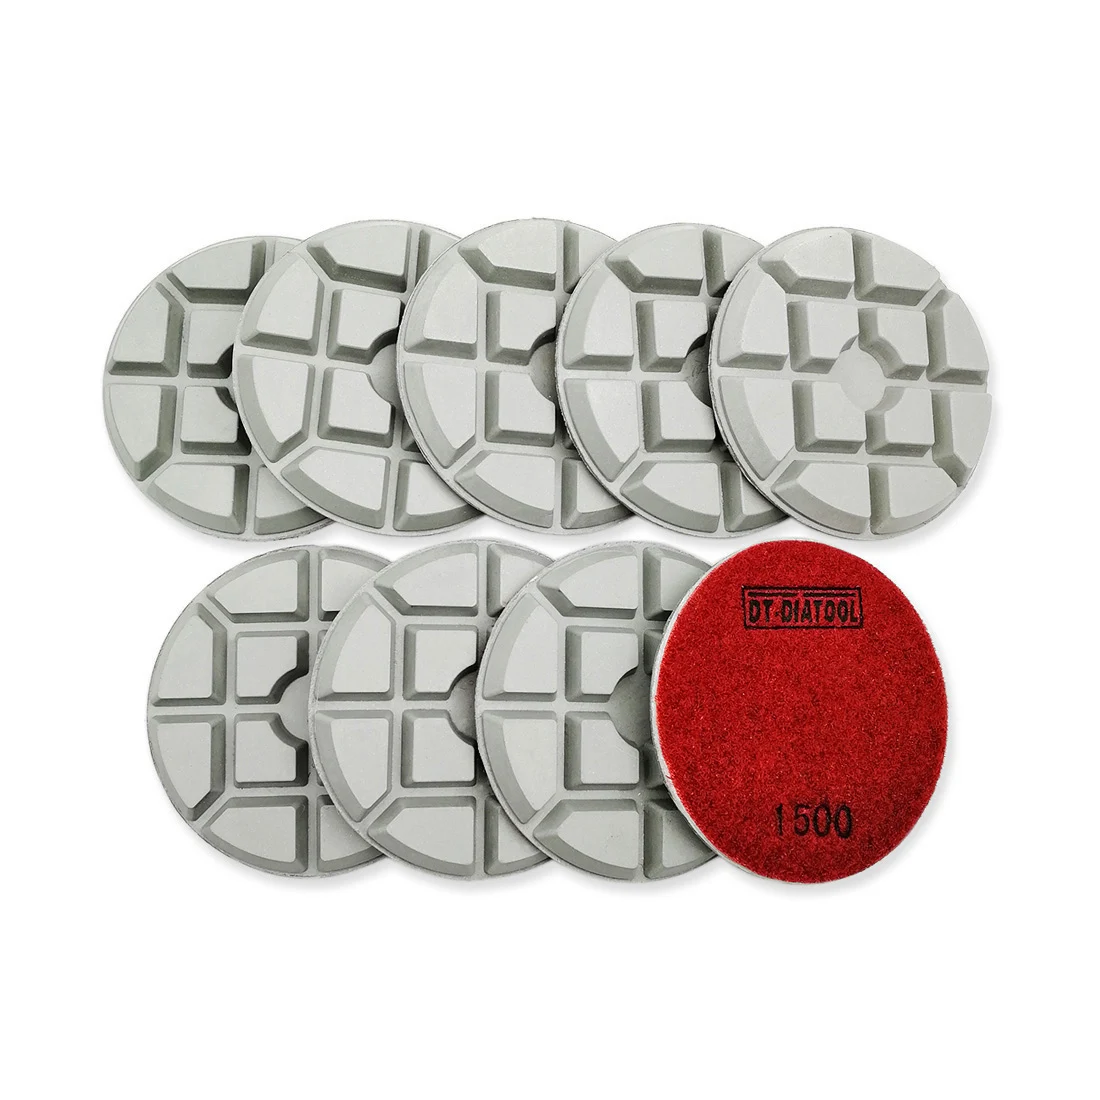 DT-DIATOOL 9pcs Diamond Concrete Polishing Pads Sanding Disc for Grinder Grinding Pads Thickness 10mm Dia 100mm/4